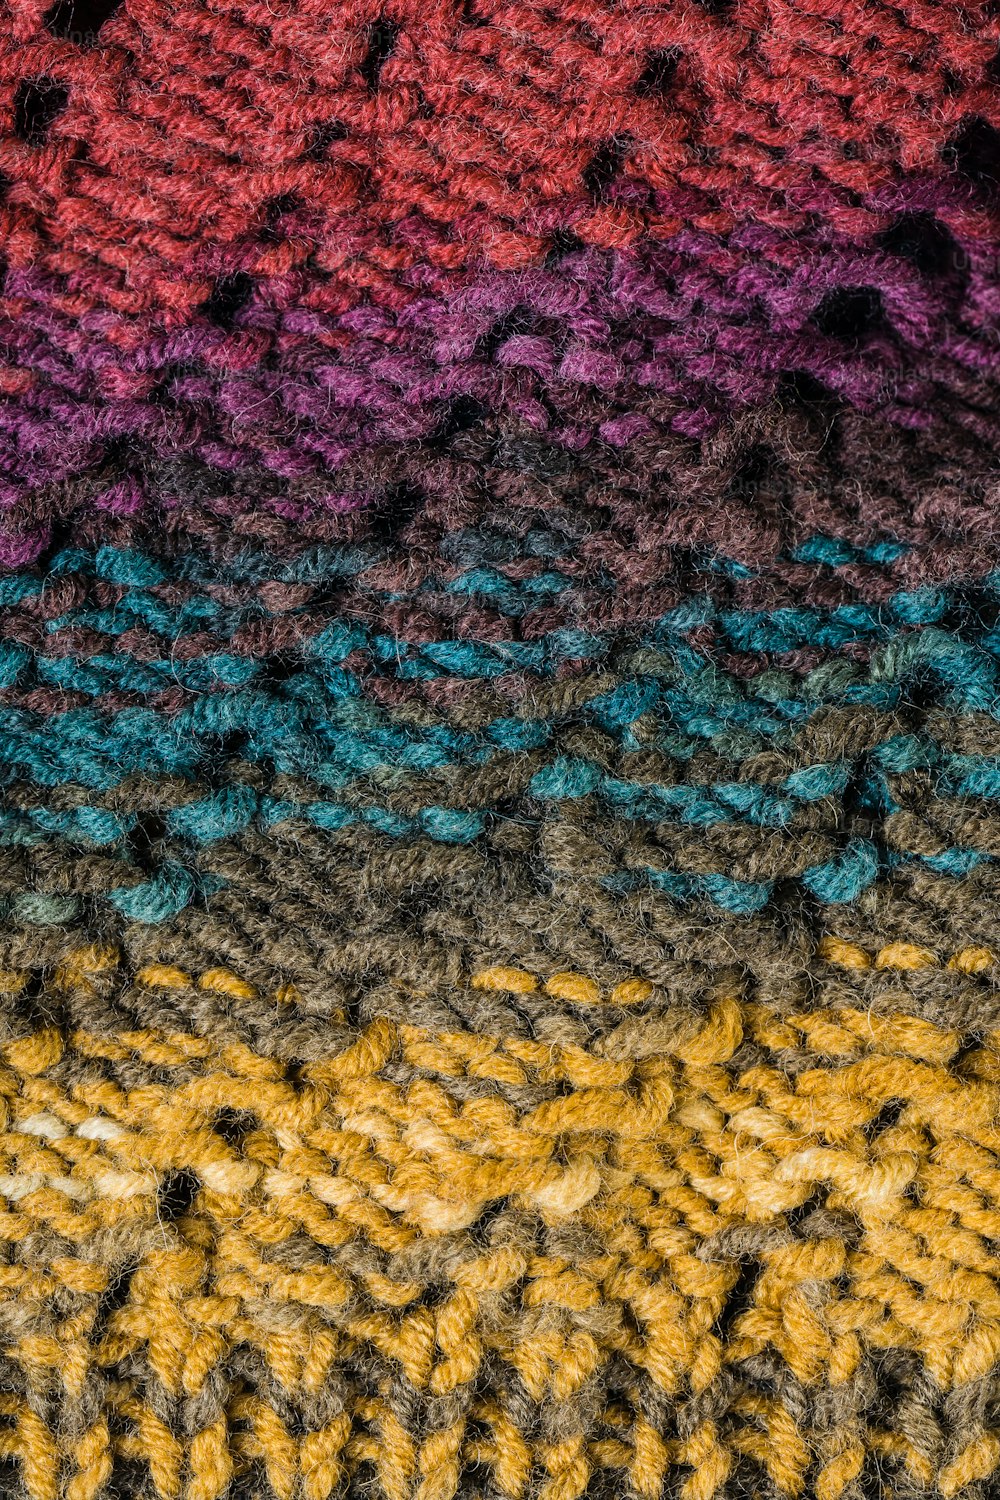 a multicolored crocheted blanket with a cell phone laying on top of